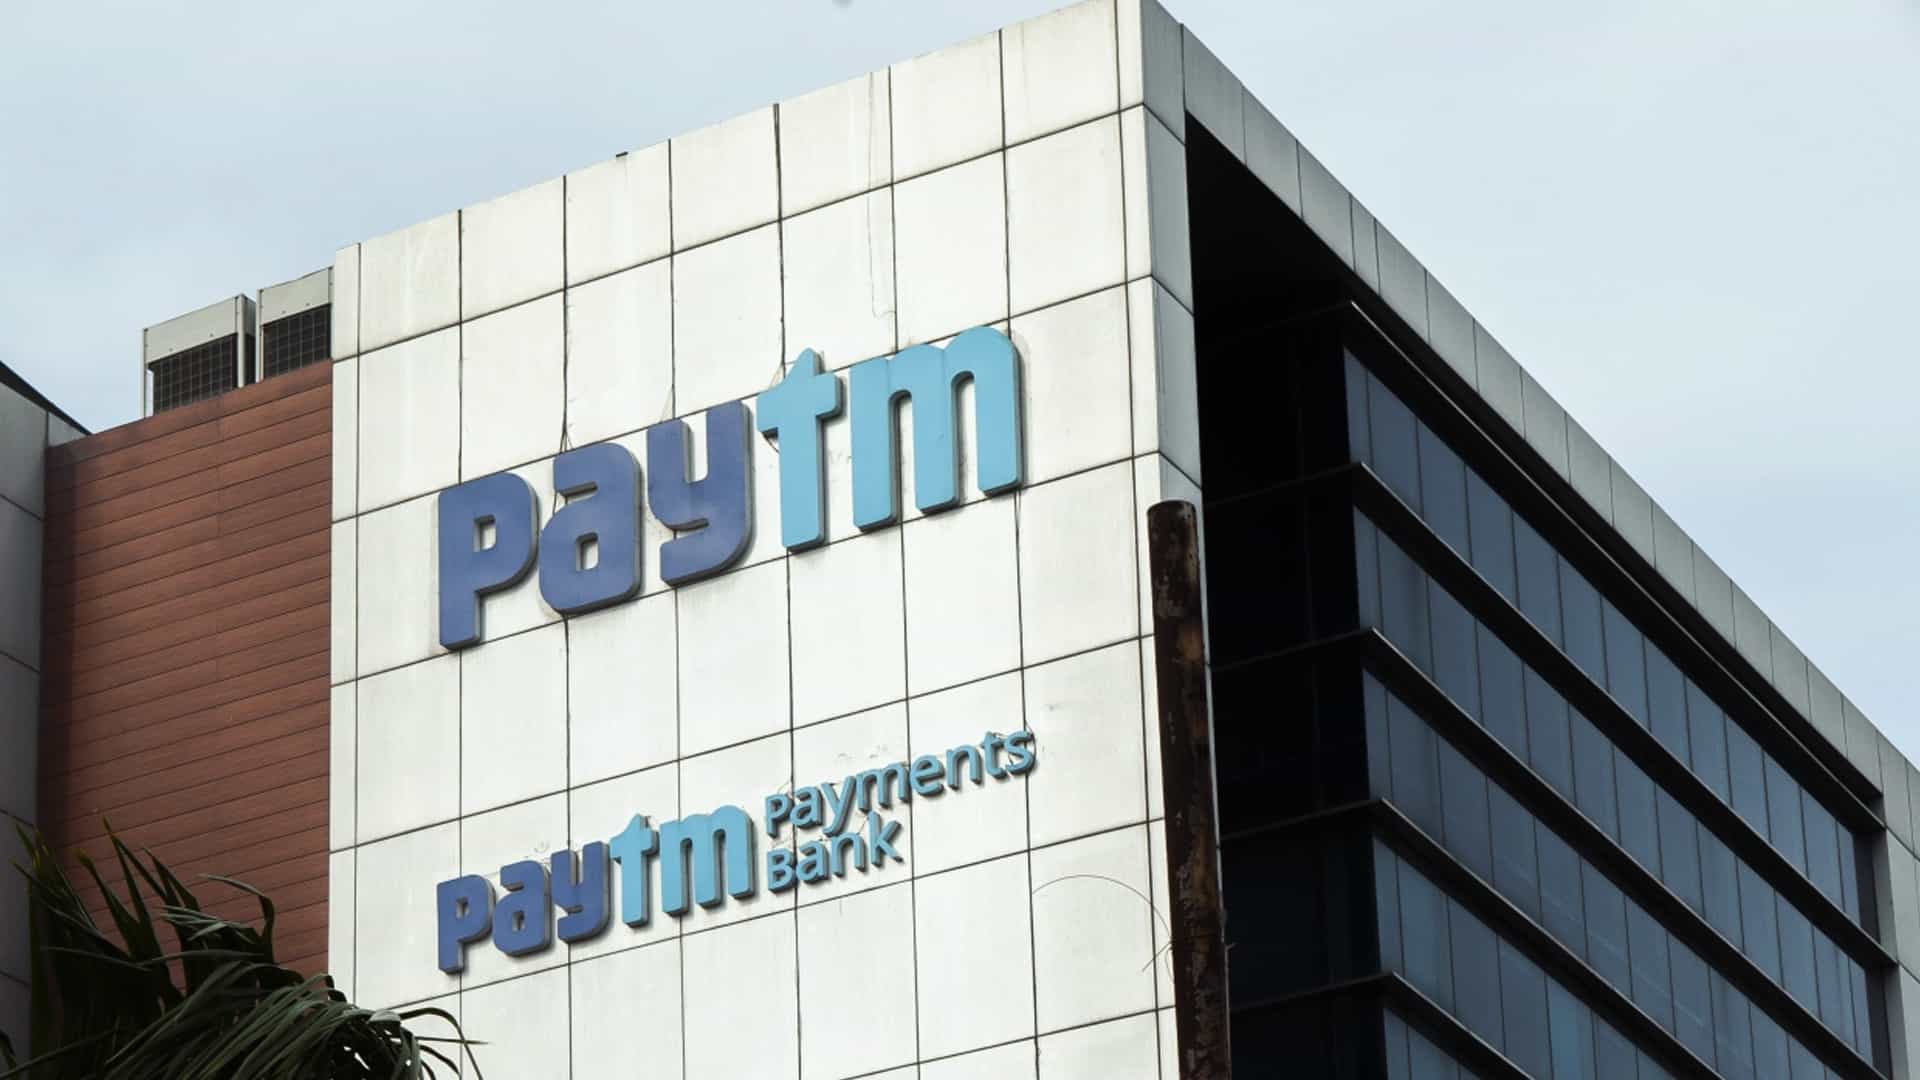 Paytm signs MoU with Government of Andhra Pradesh at Global Investors Summit 2023, to drive initiatives in Financial Inclusion, Public Health, Cyber Security